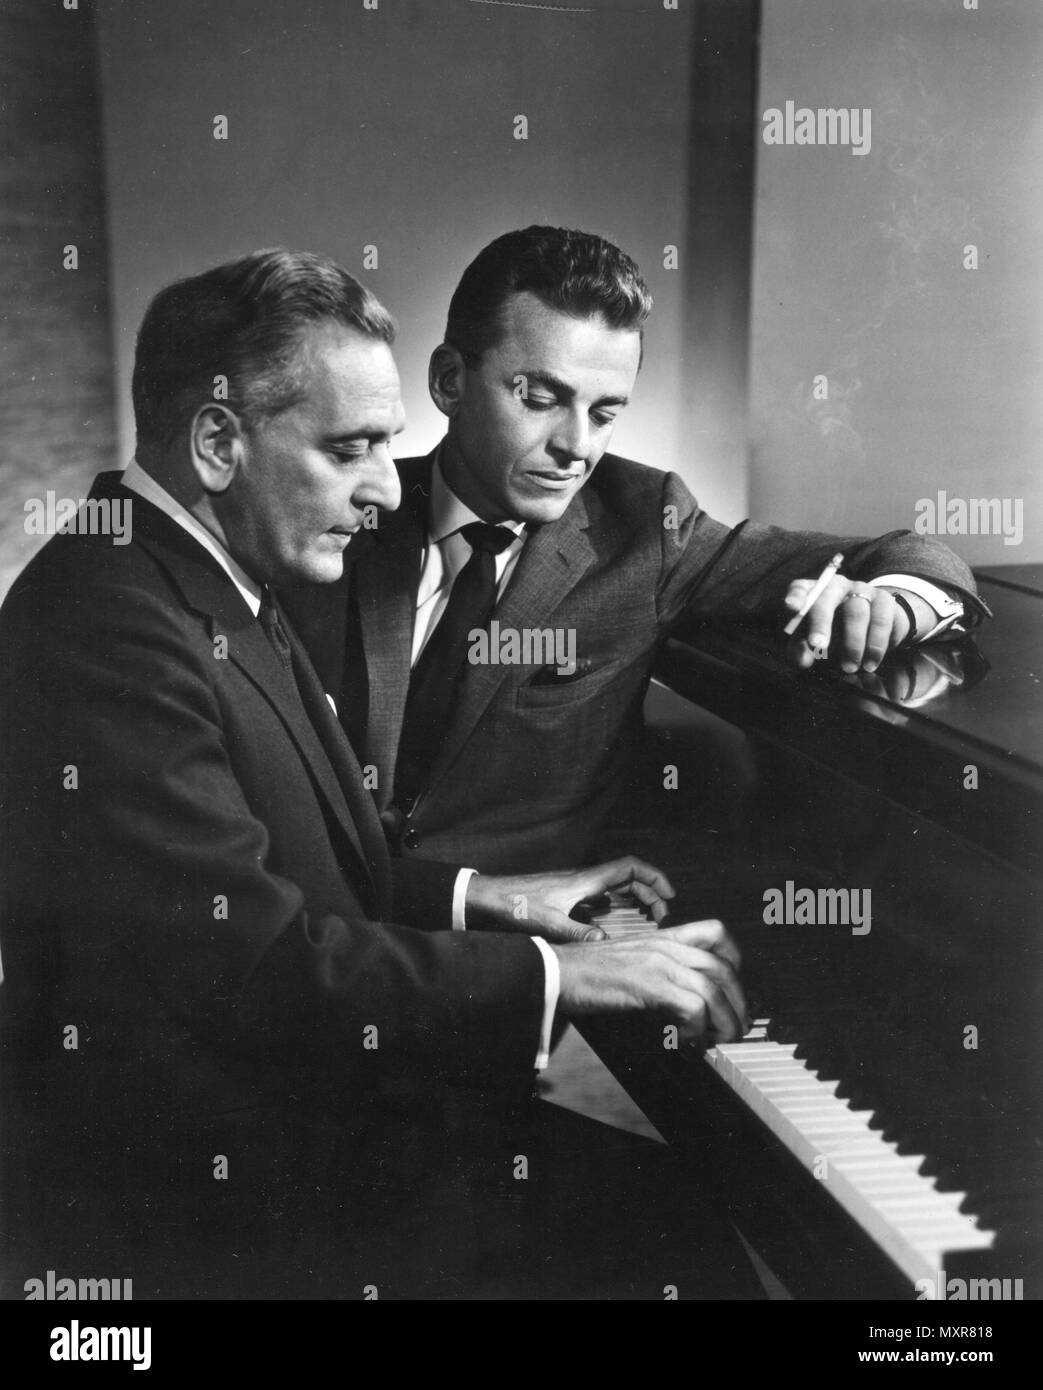 Alan Jay Lerner (with cigarette), and Frederick Loewe work together at the piano on another Broadway musical score. The two collaborated on the Broadway production 'My Fair Lady.' New York, NY, 1960. Stock Photo